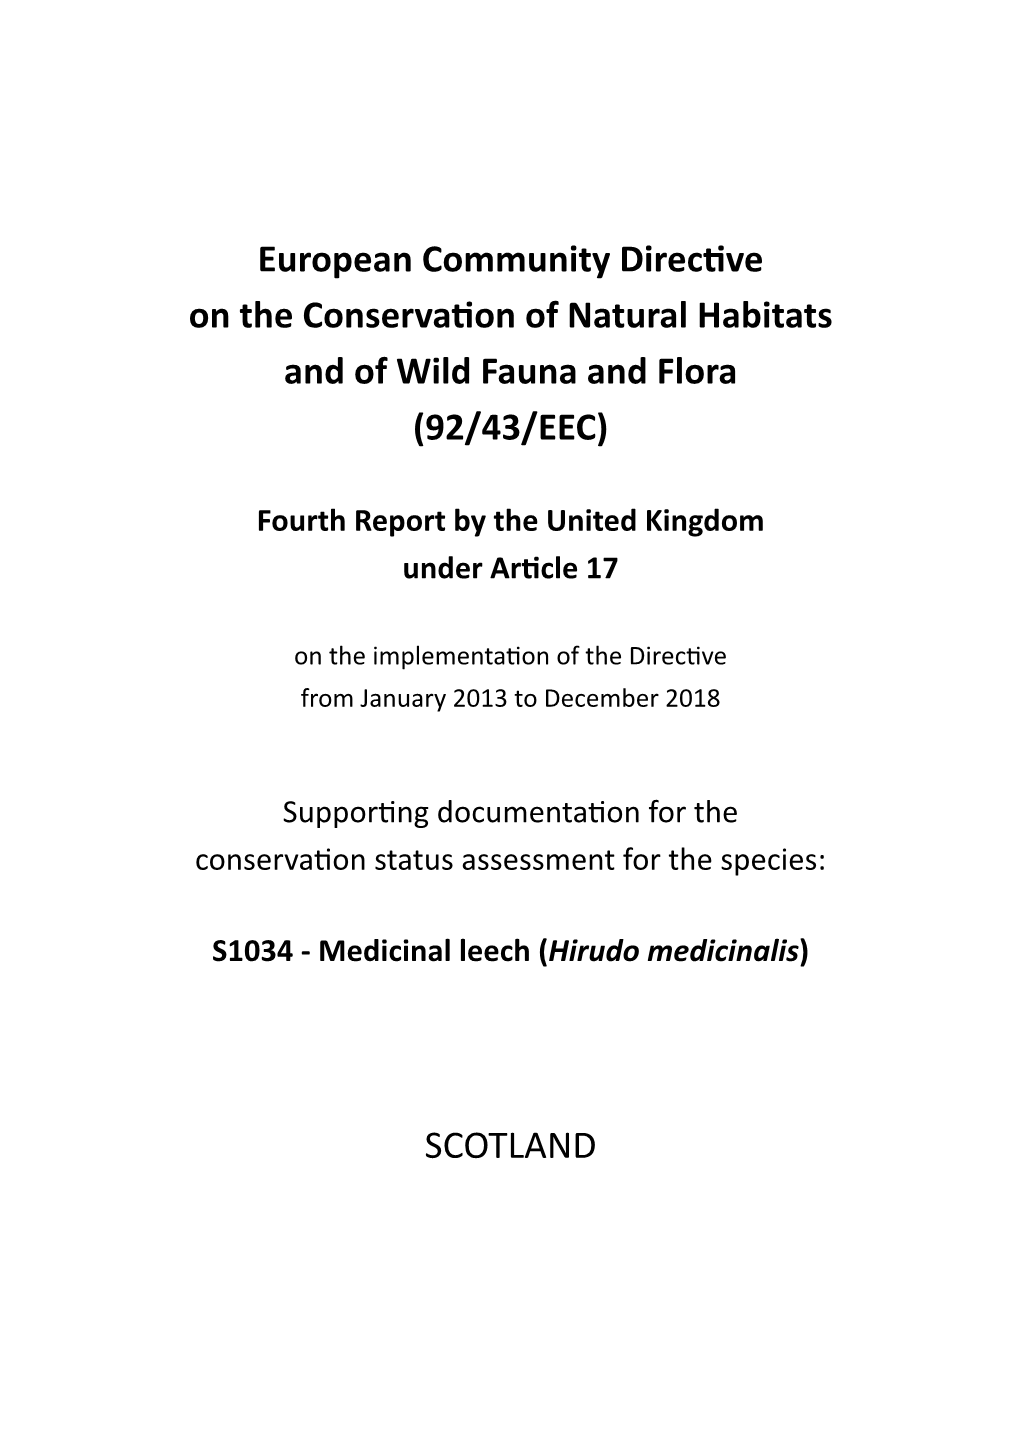 Scotland Information for S1034